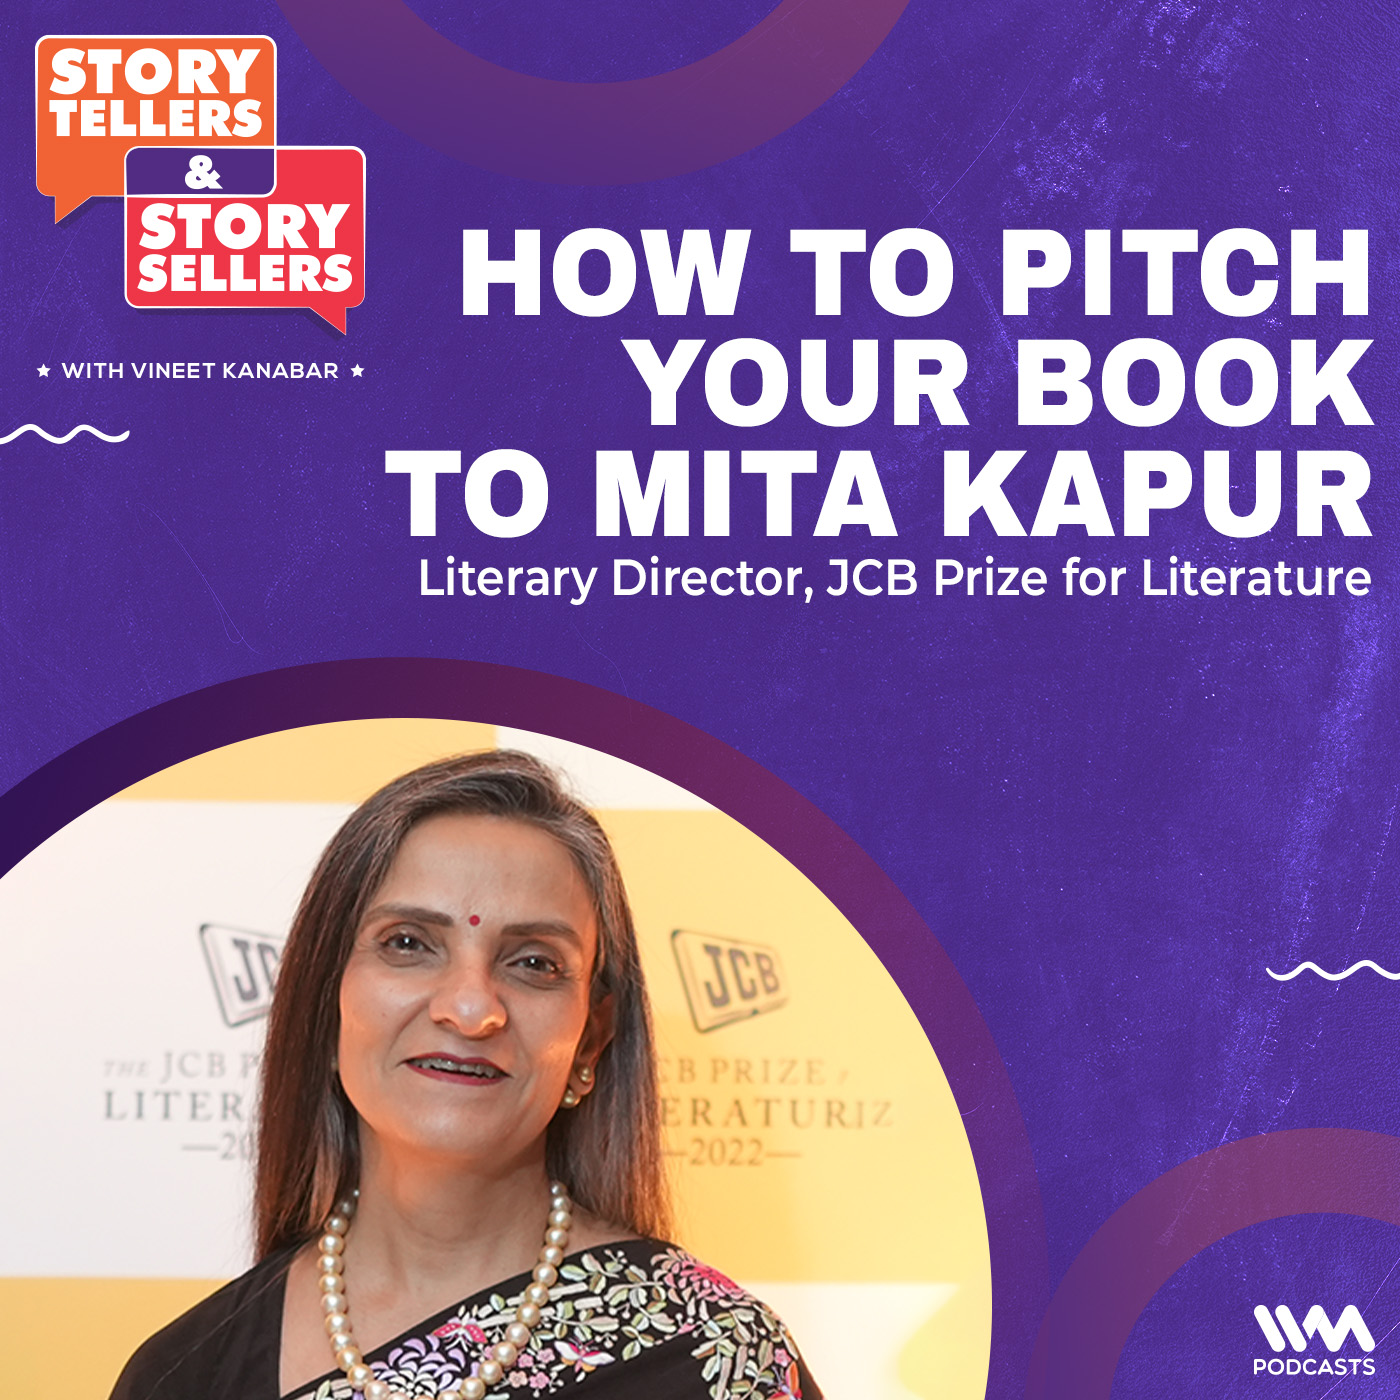 How to Pitch Your Book to Mita Kapur